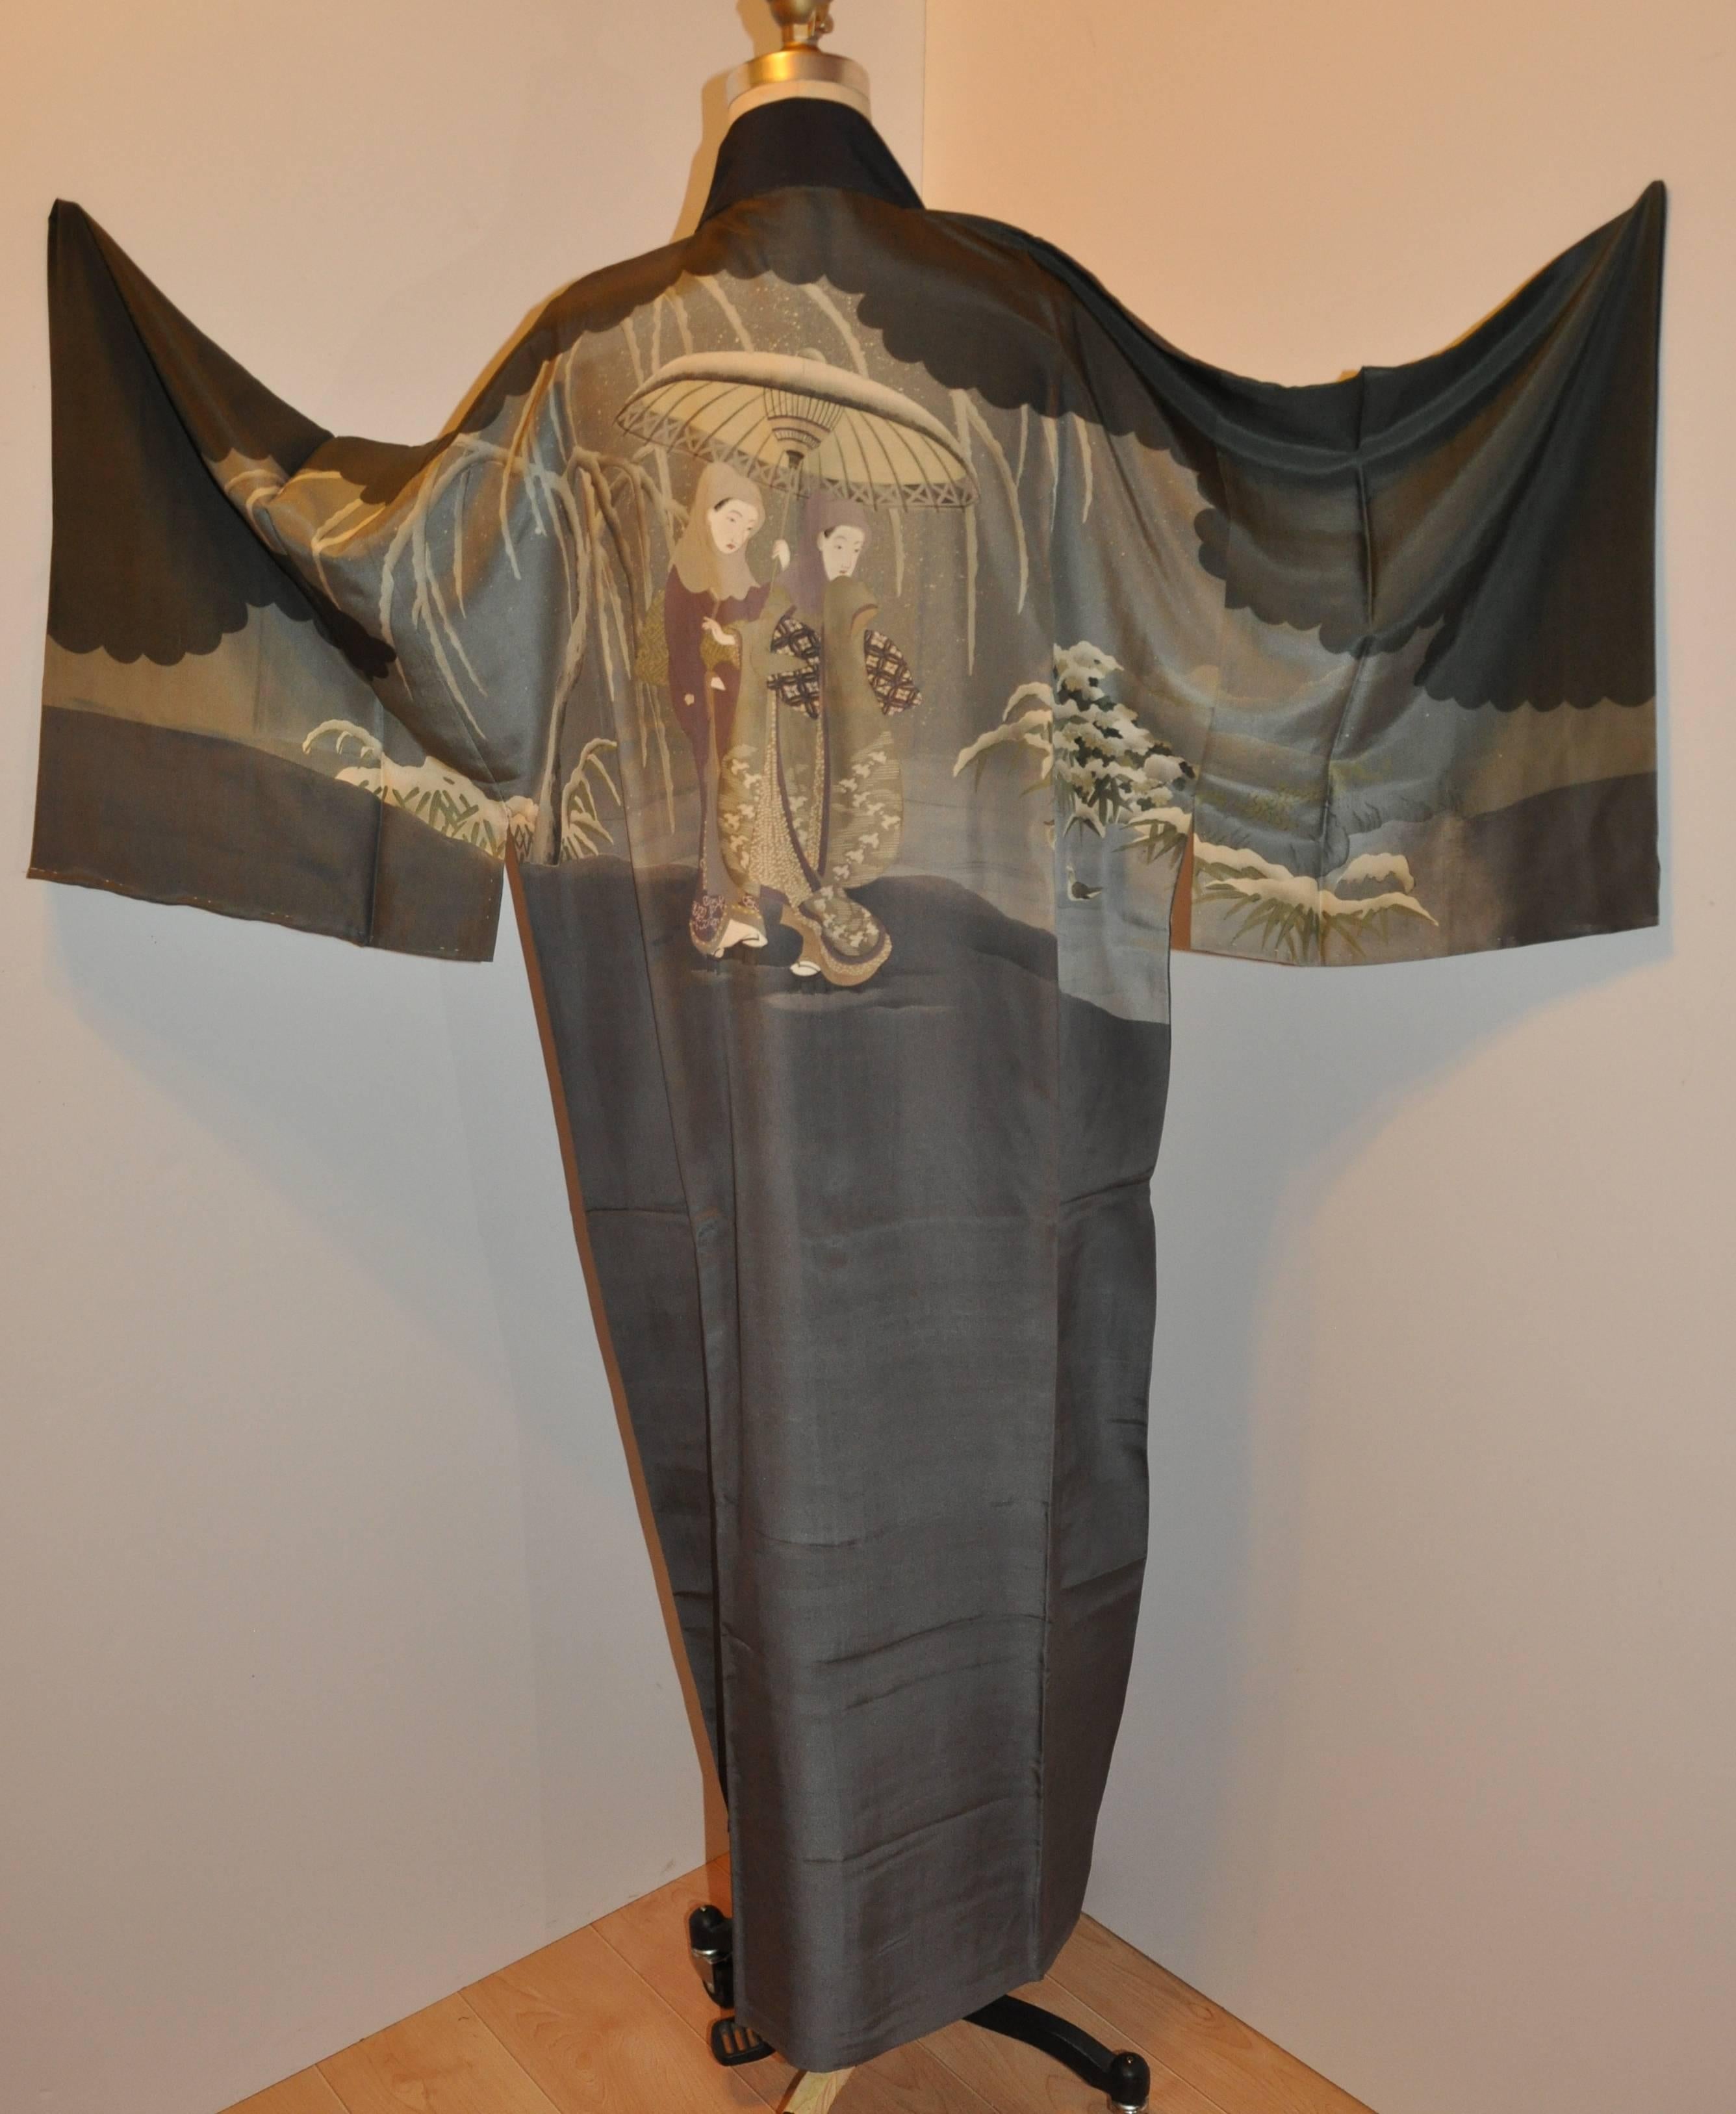        This wonderfully elegant and detailed portrait accenting the backside of this combination of shades of grays & black silk kimono is finely hand-painted. The total length measures 52 inches, underarm circumference is 48", collar width